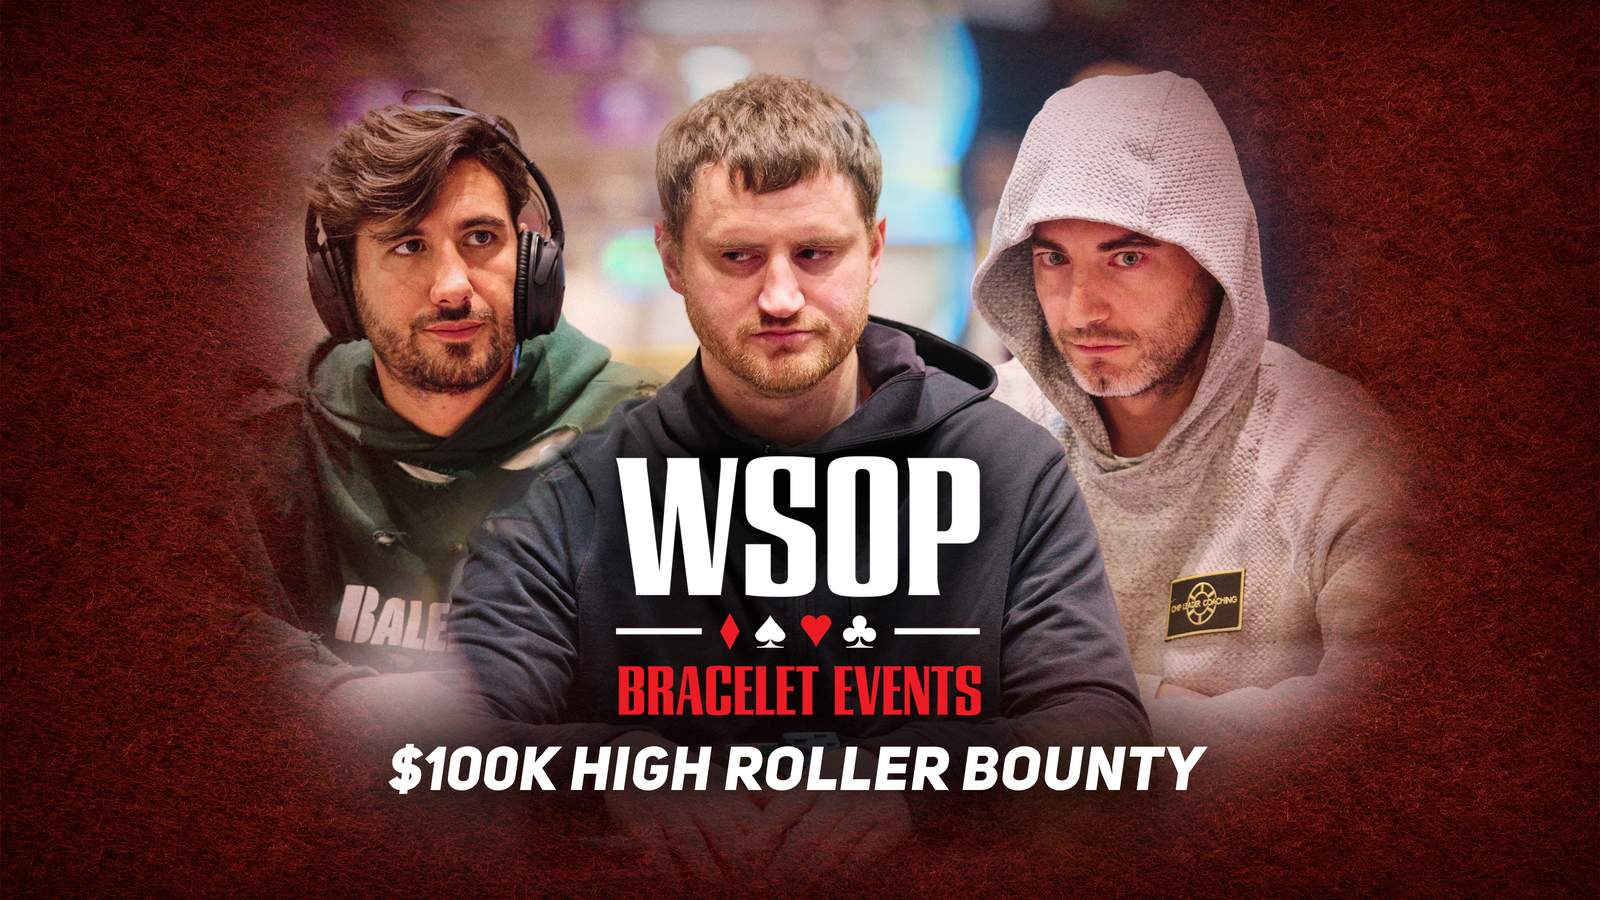 Watch the WSOP Event #2: $100K High Roller Bounty Final Table on PokerGO.com at 5 p.m. ET